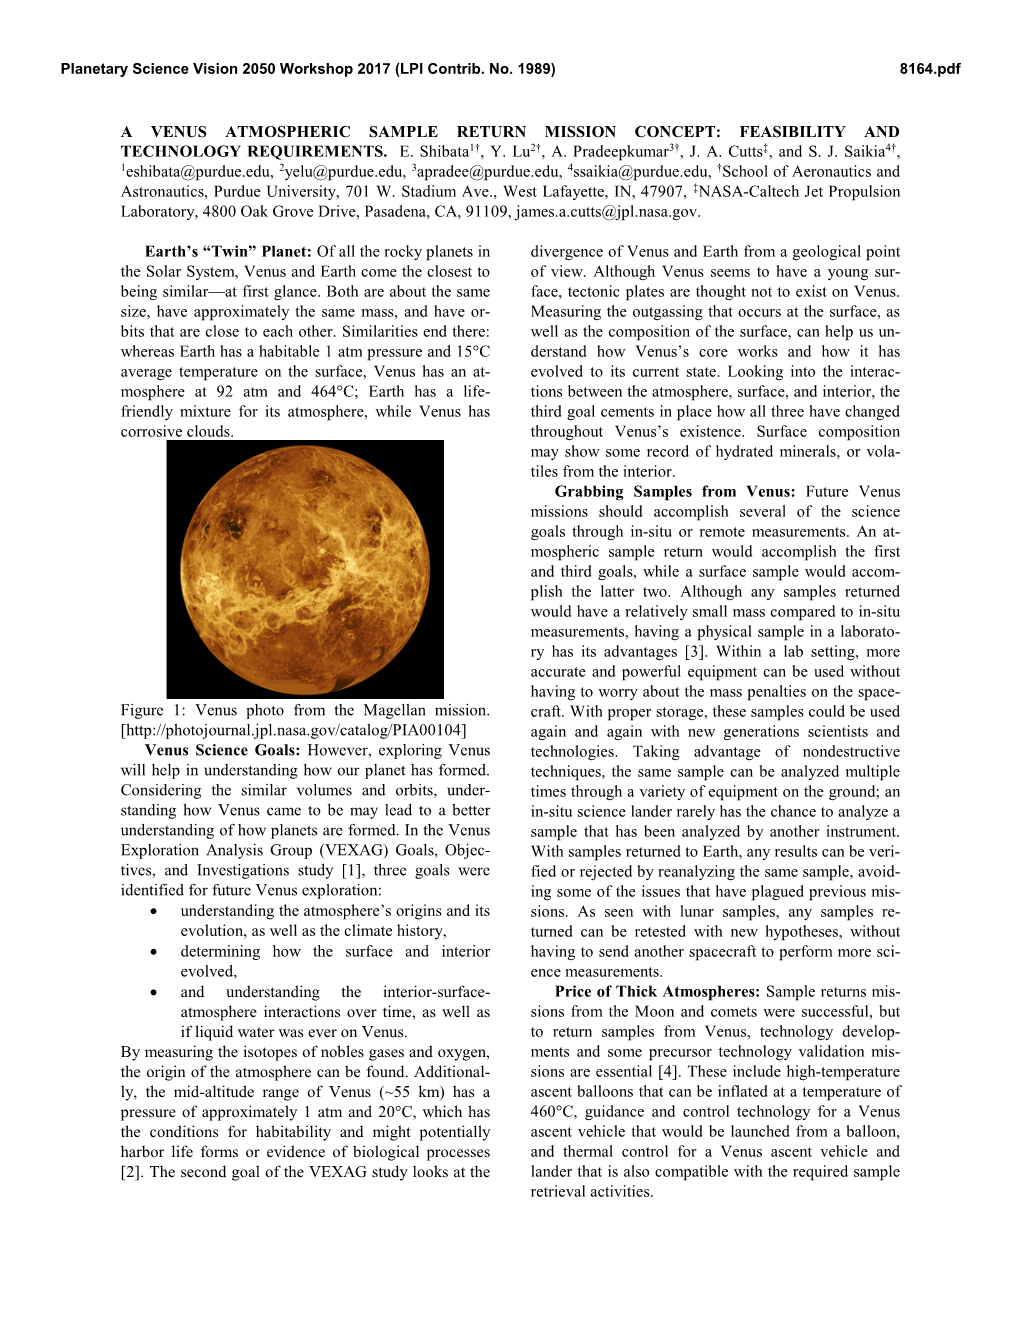 A Venus Atmospheric Sample Return Mission Concept: Feasibility and Technology Requirements